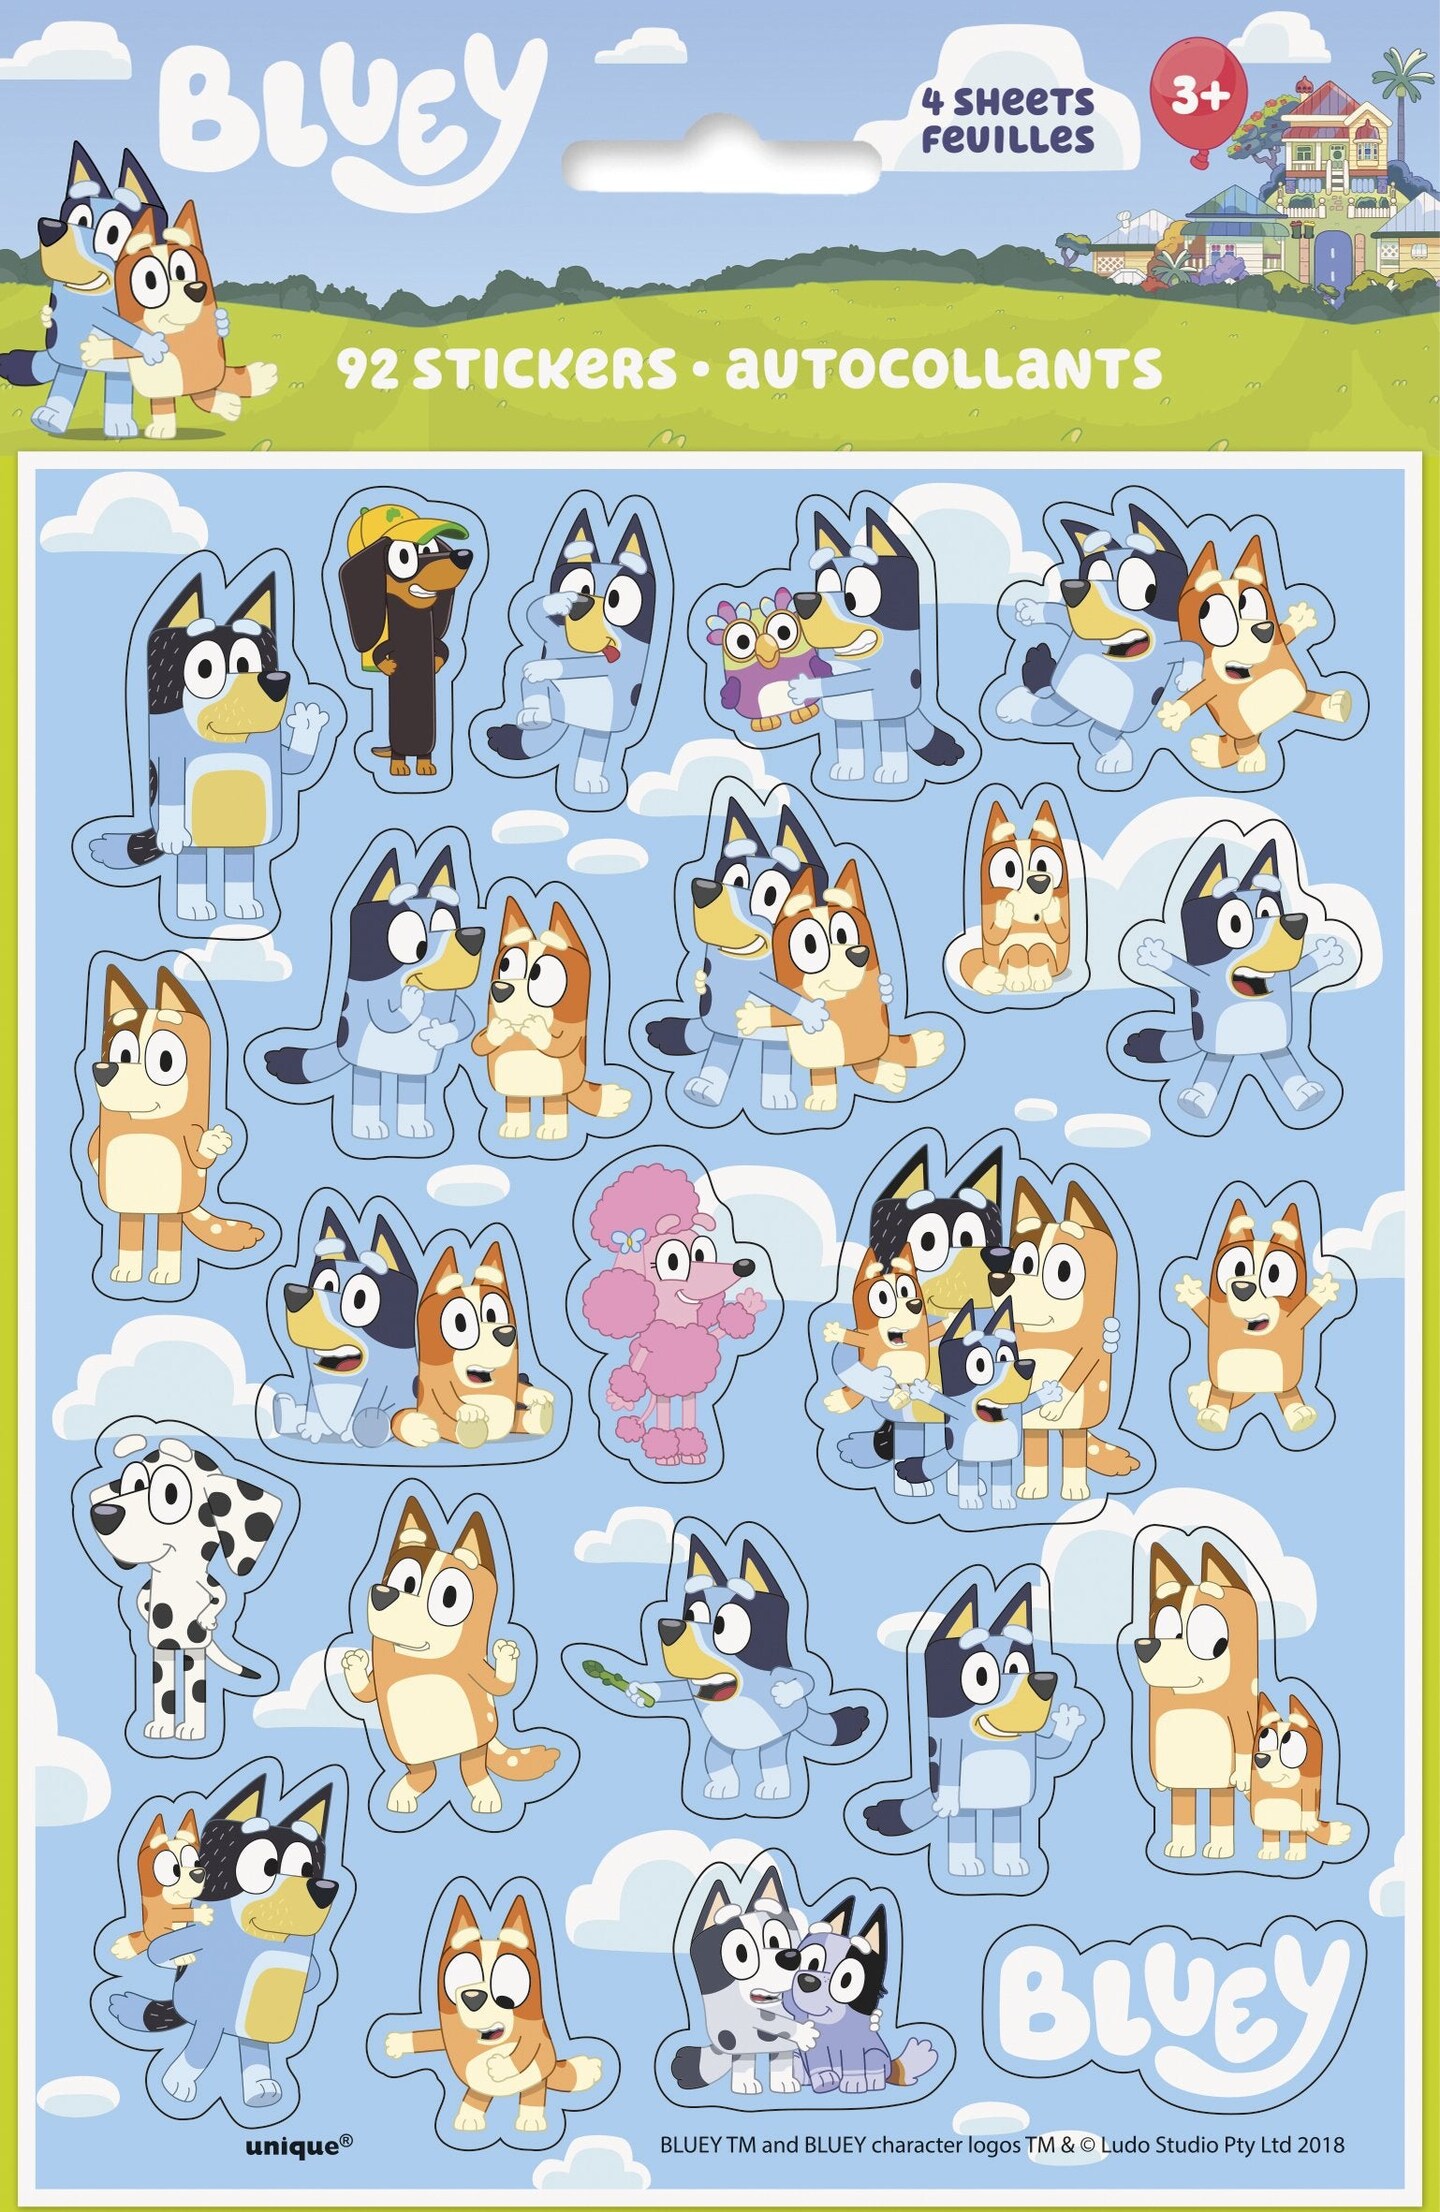 Bluey Party Favor Supplies; Bluey Party Birthday Decorations